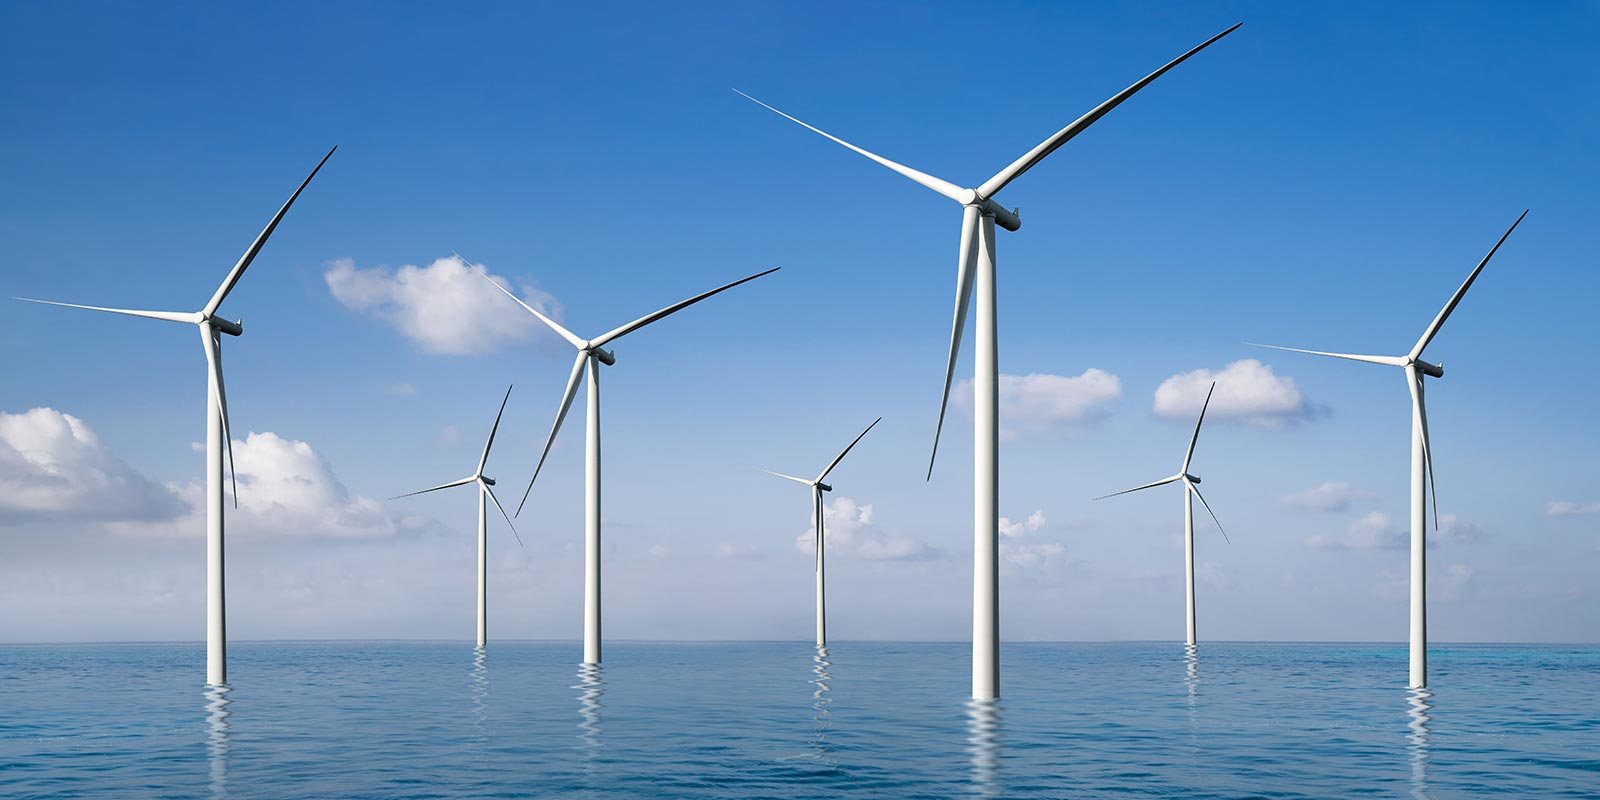 Wind turbines in the ocean are backed by a blue sky with clouds.